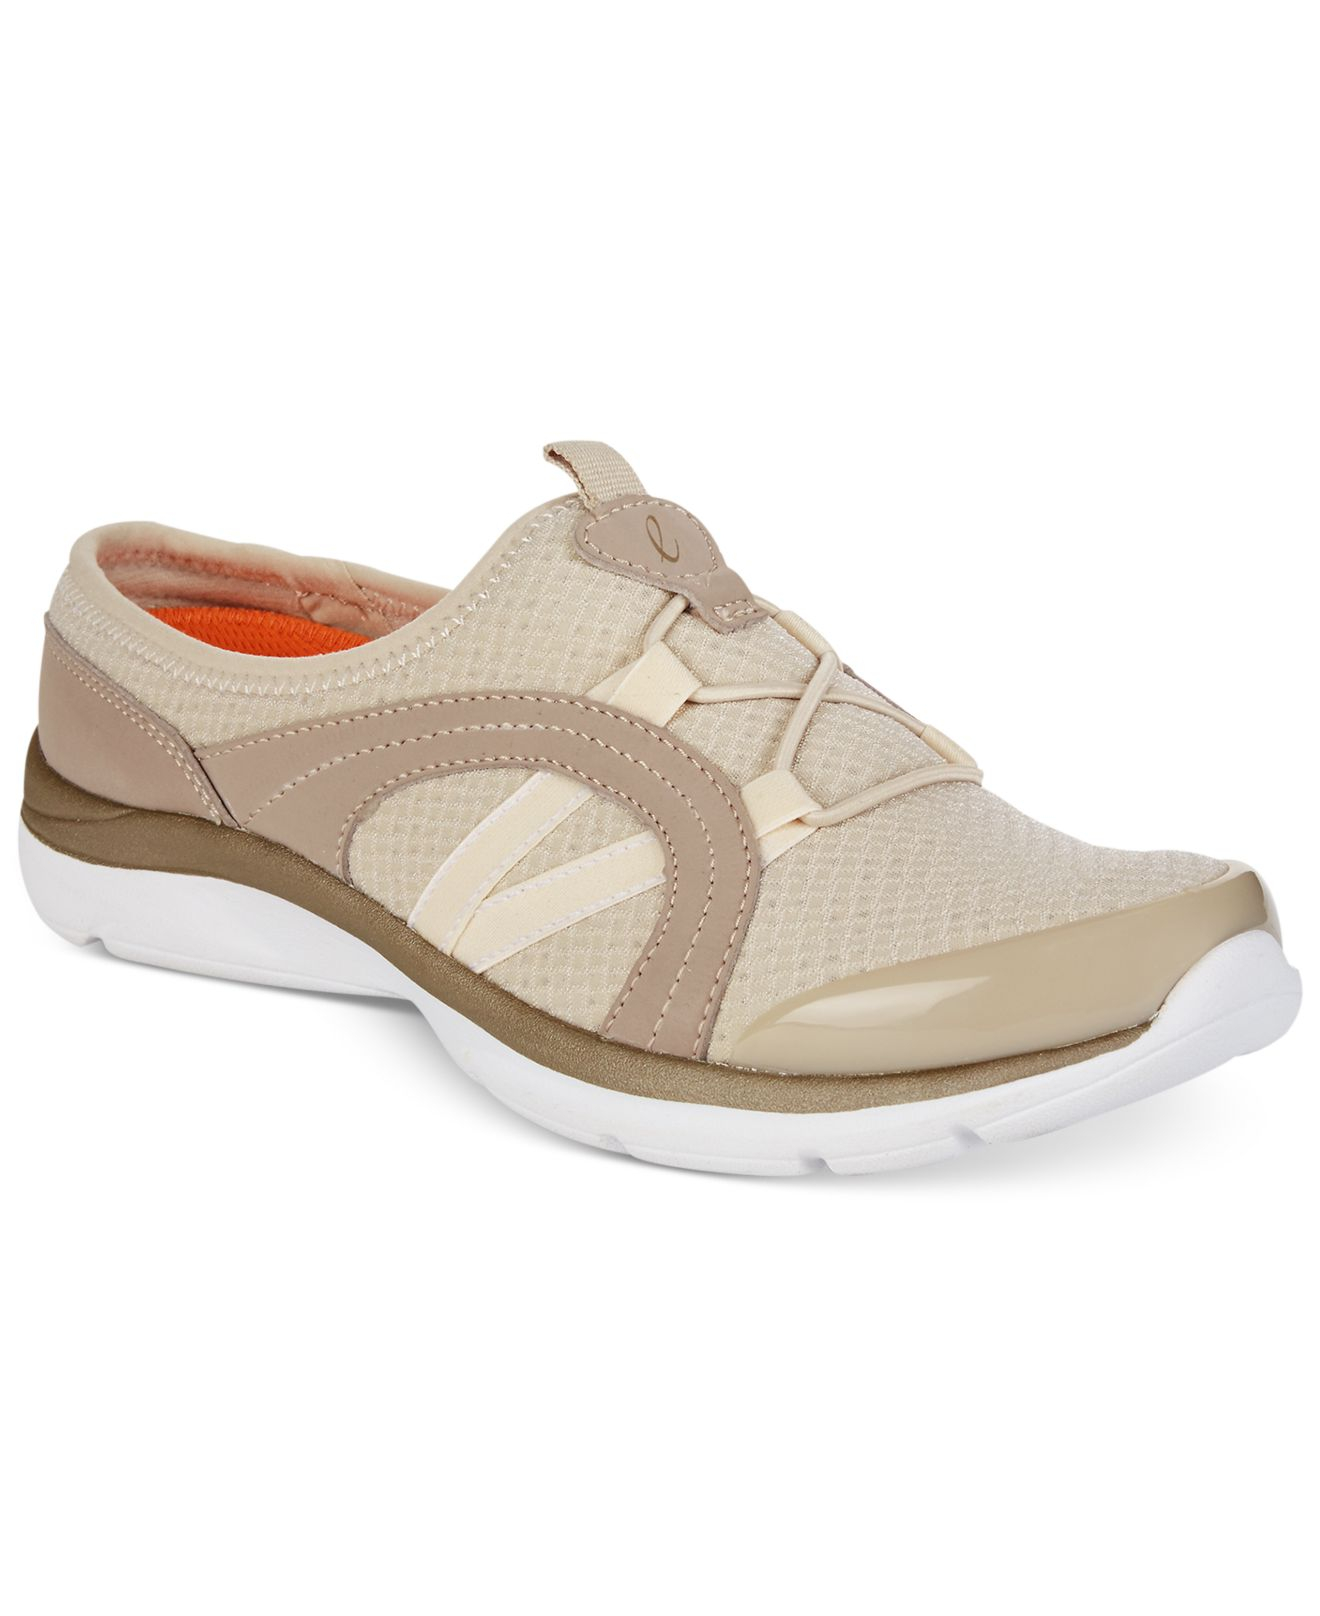 Easy spirit Quade Sneakers in Natural | Lyst